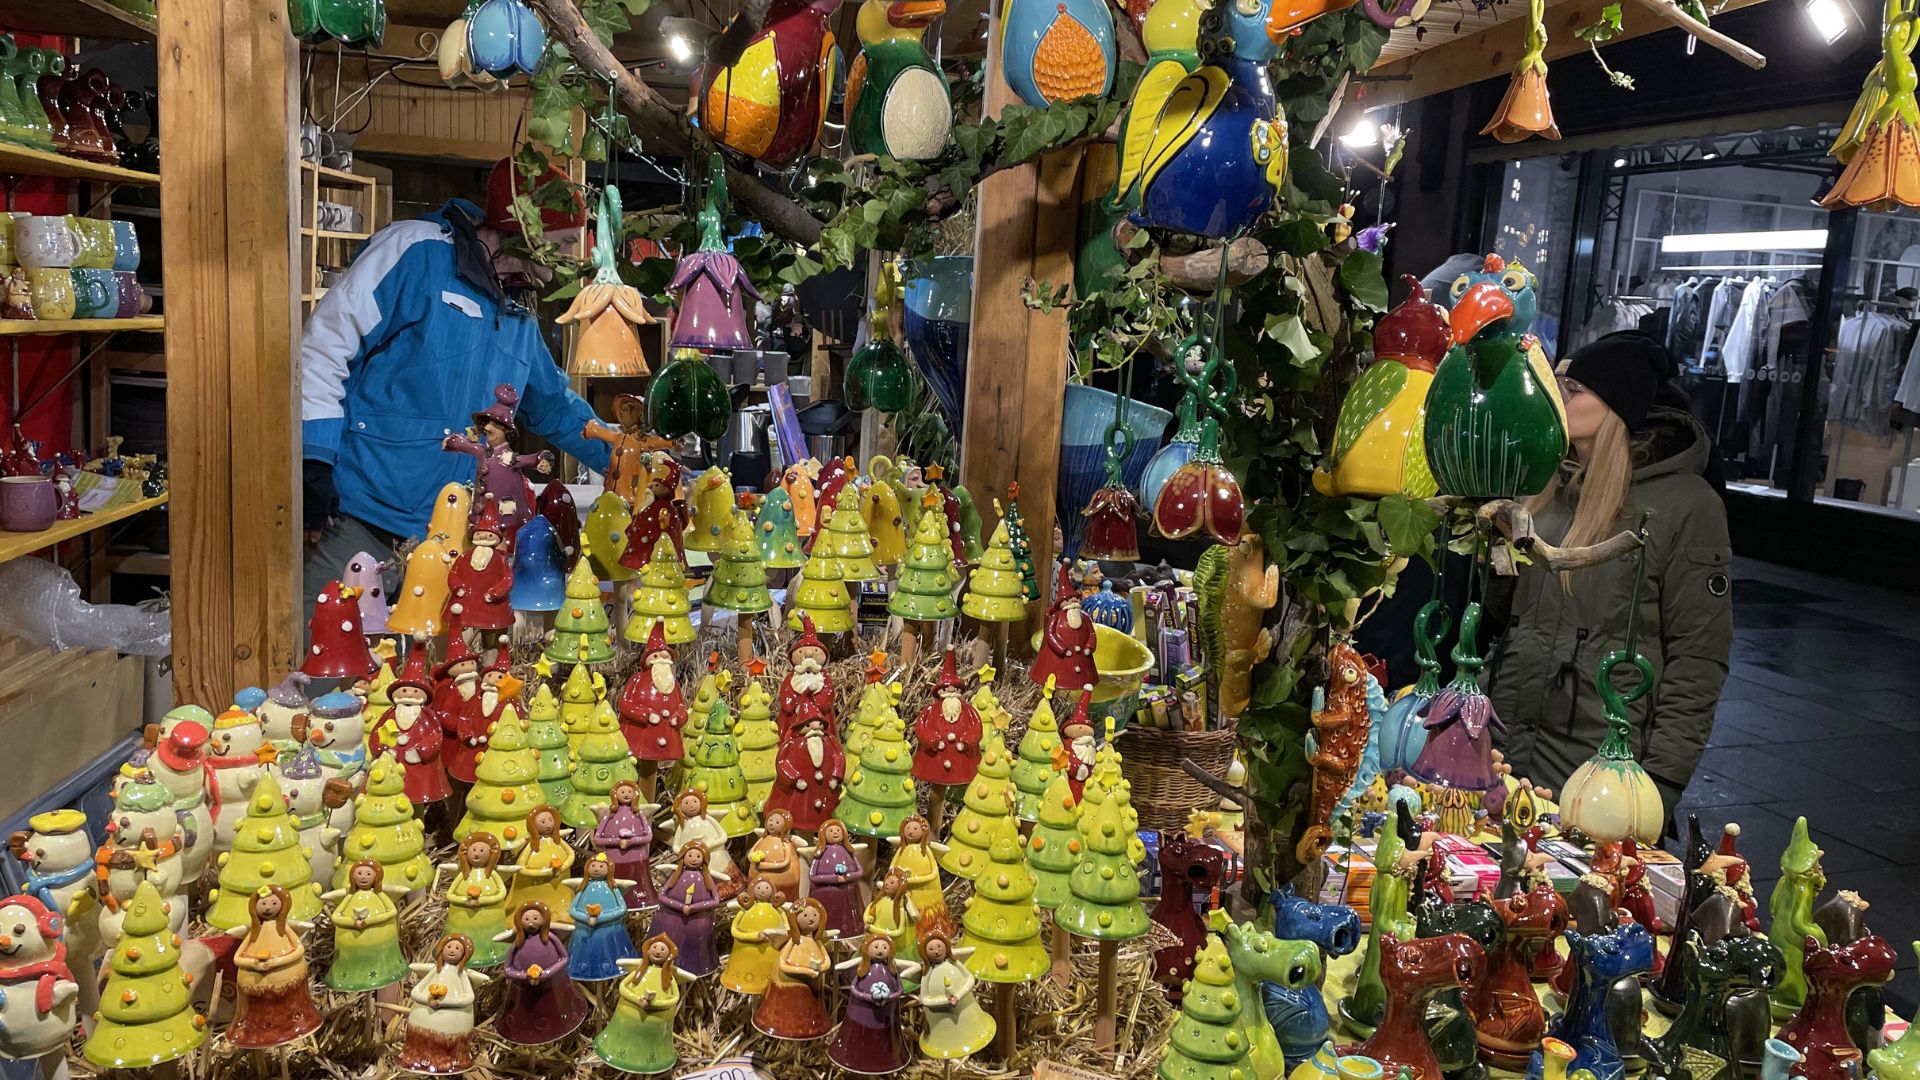 Christmas ornaments at the market